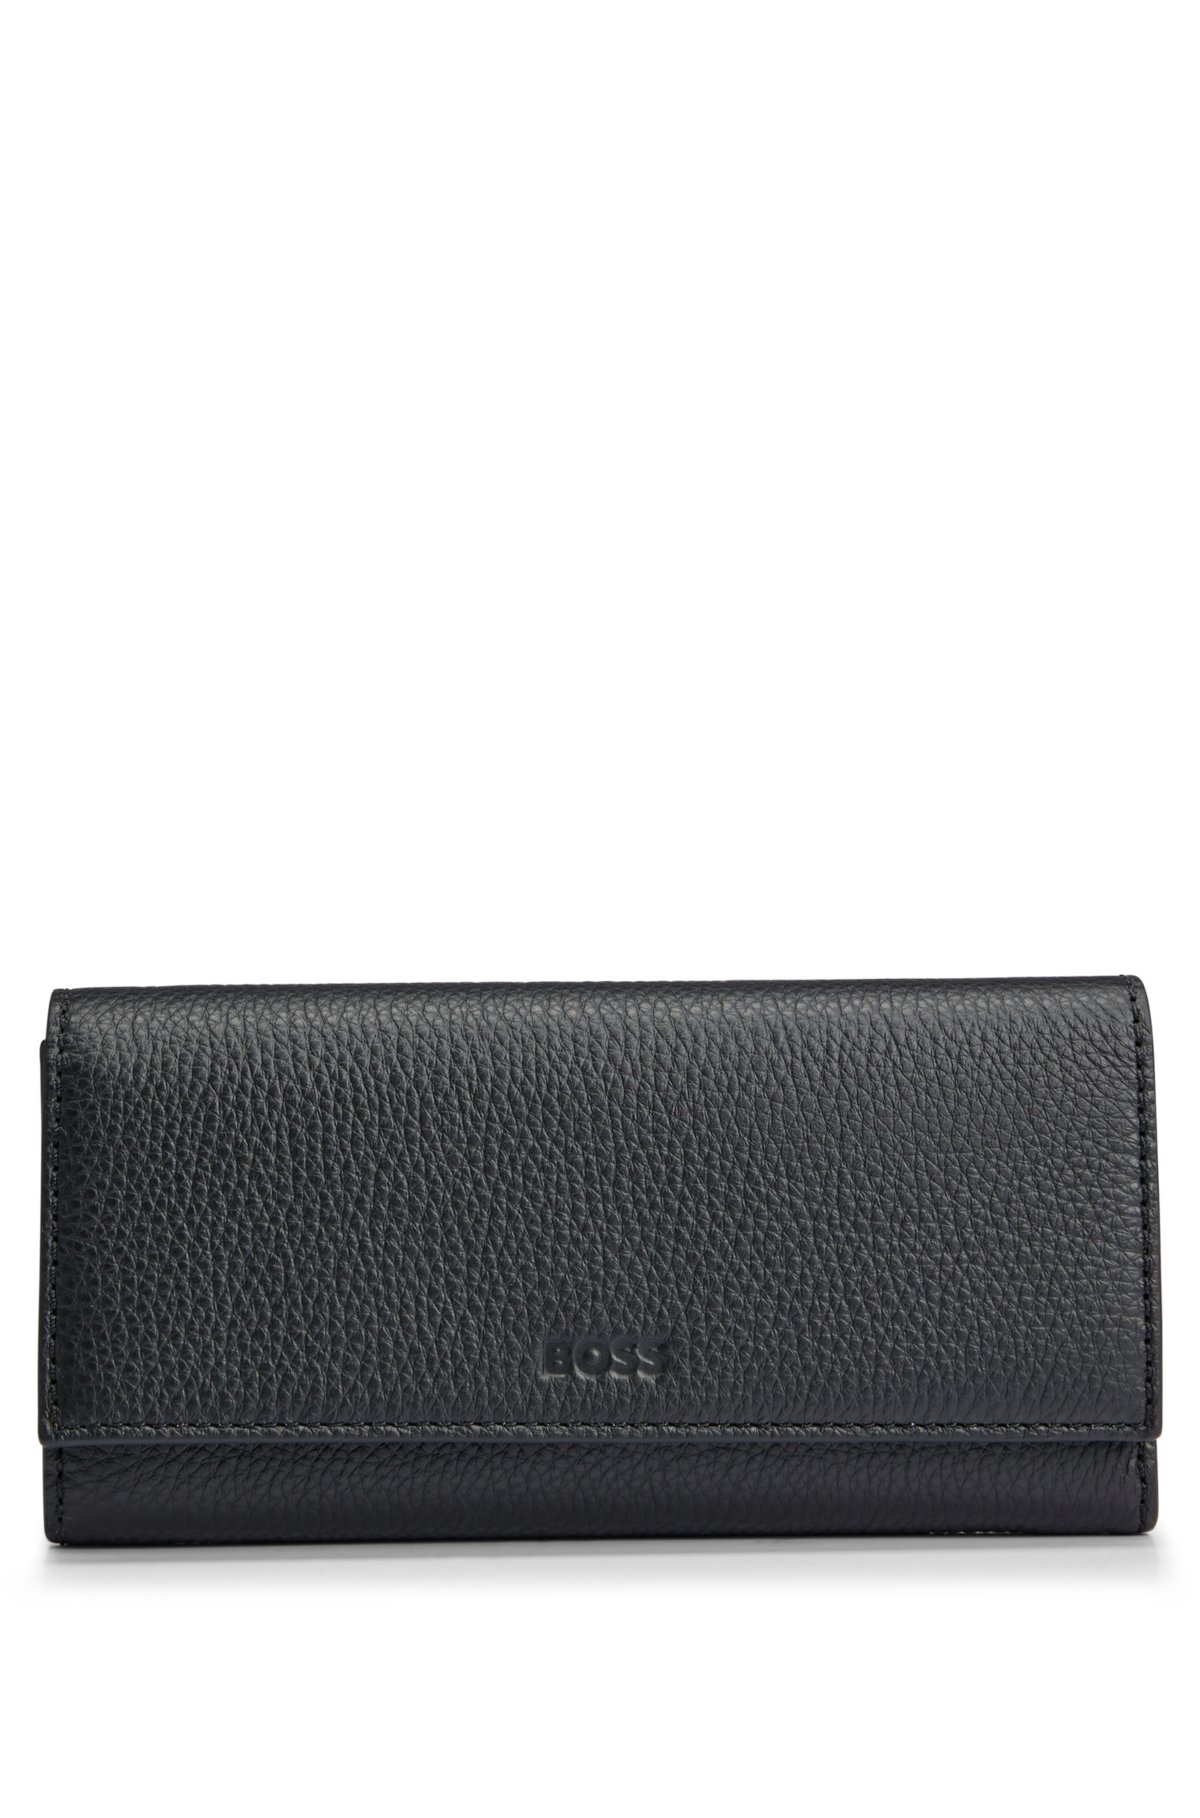 BOSS - Grained-leather wallet with embossed logo